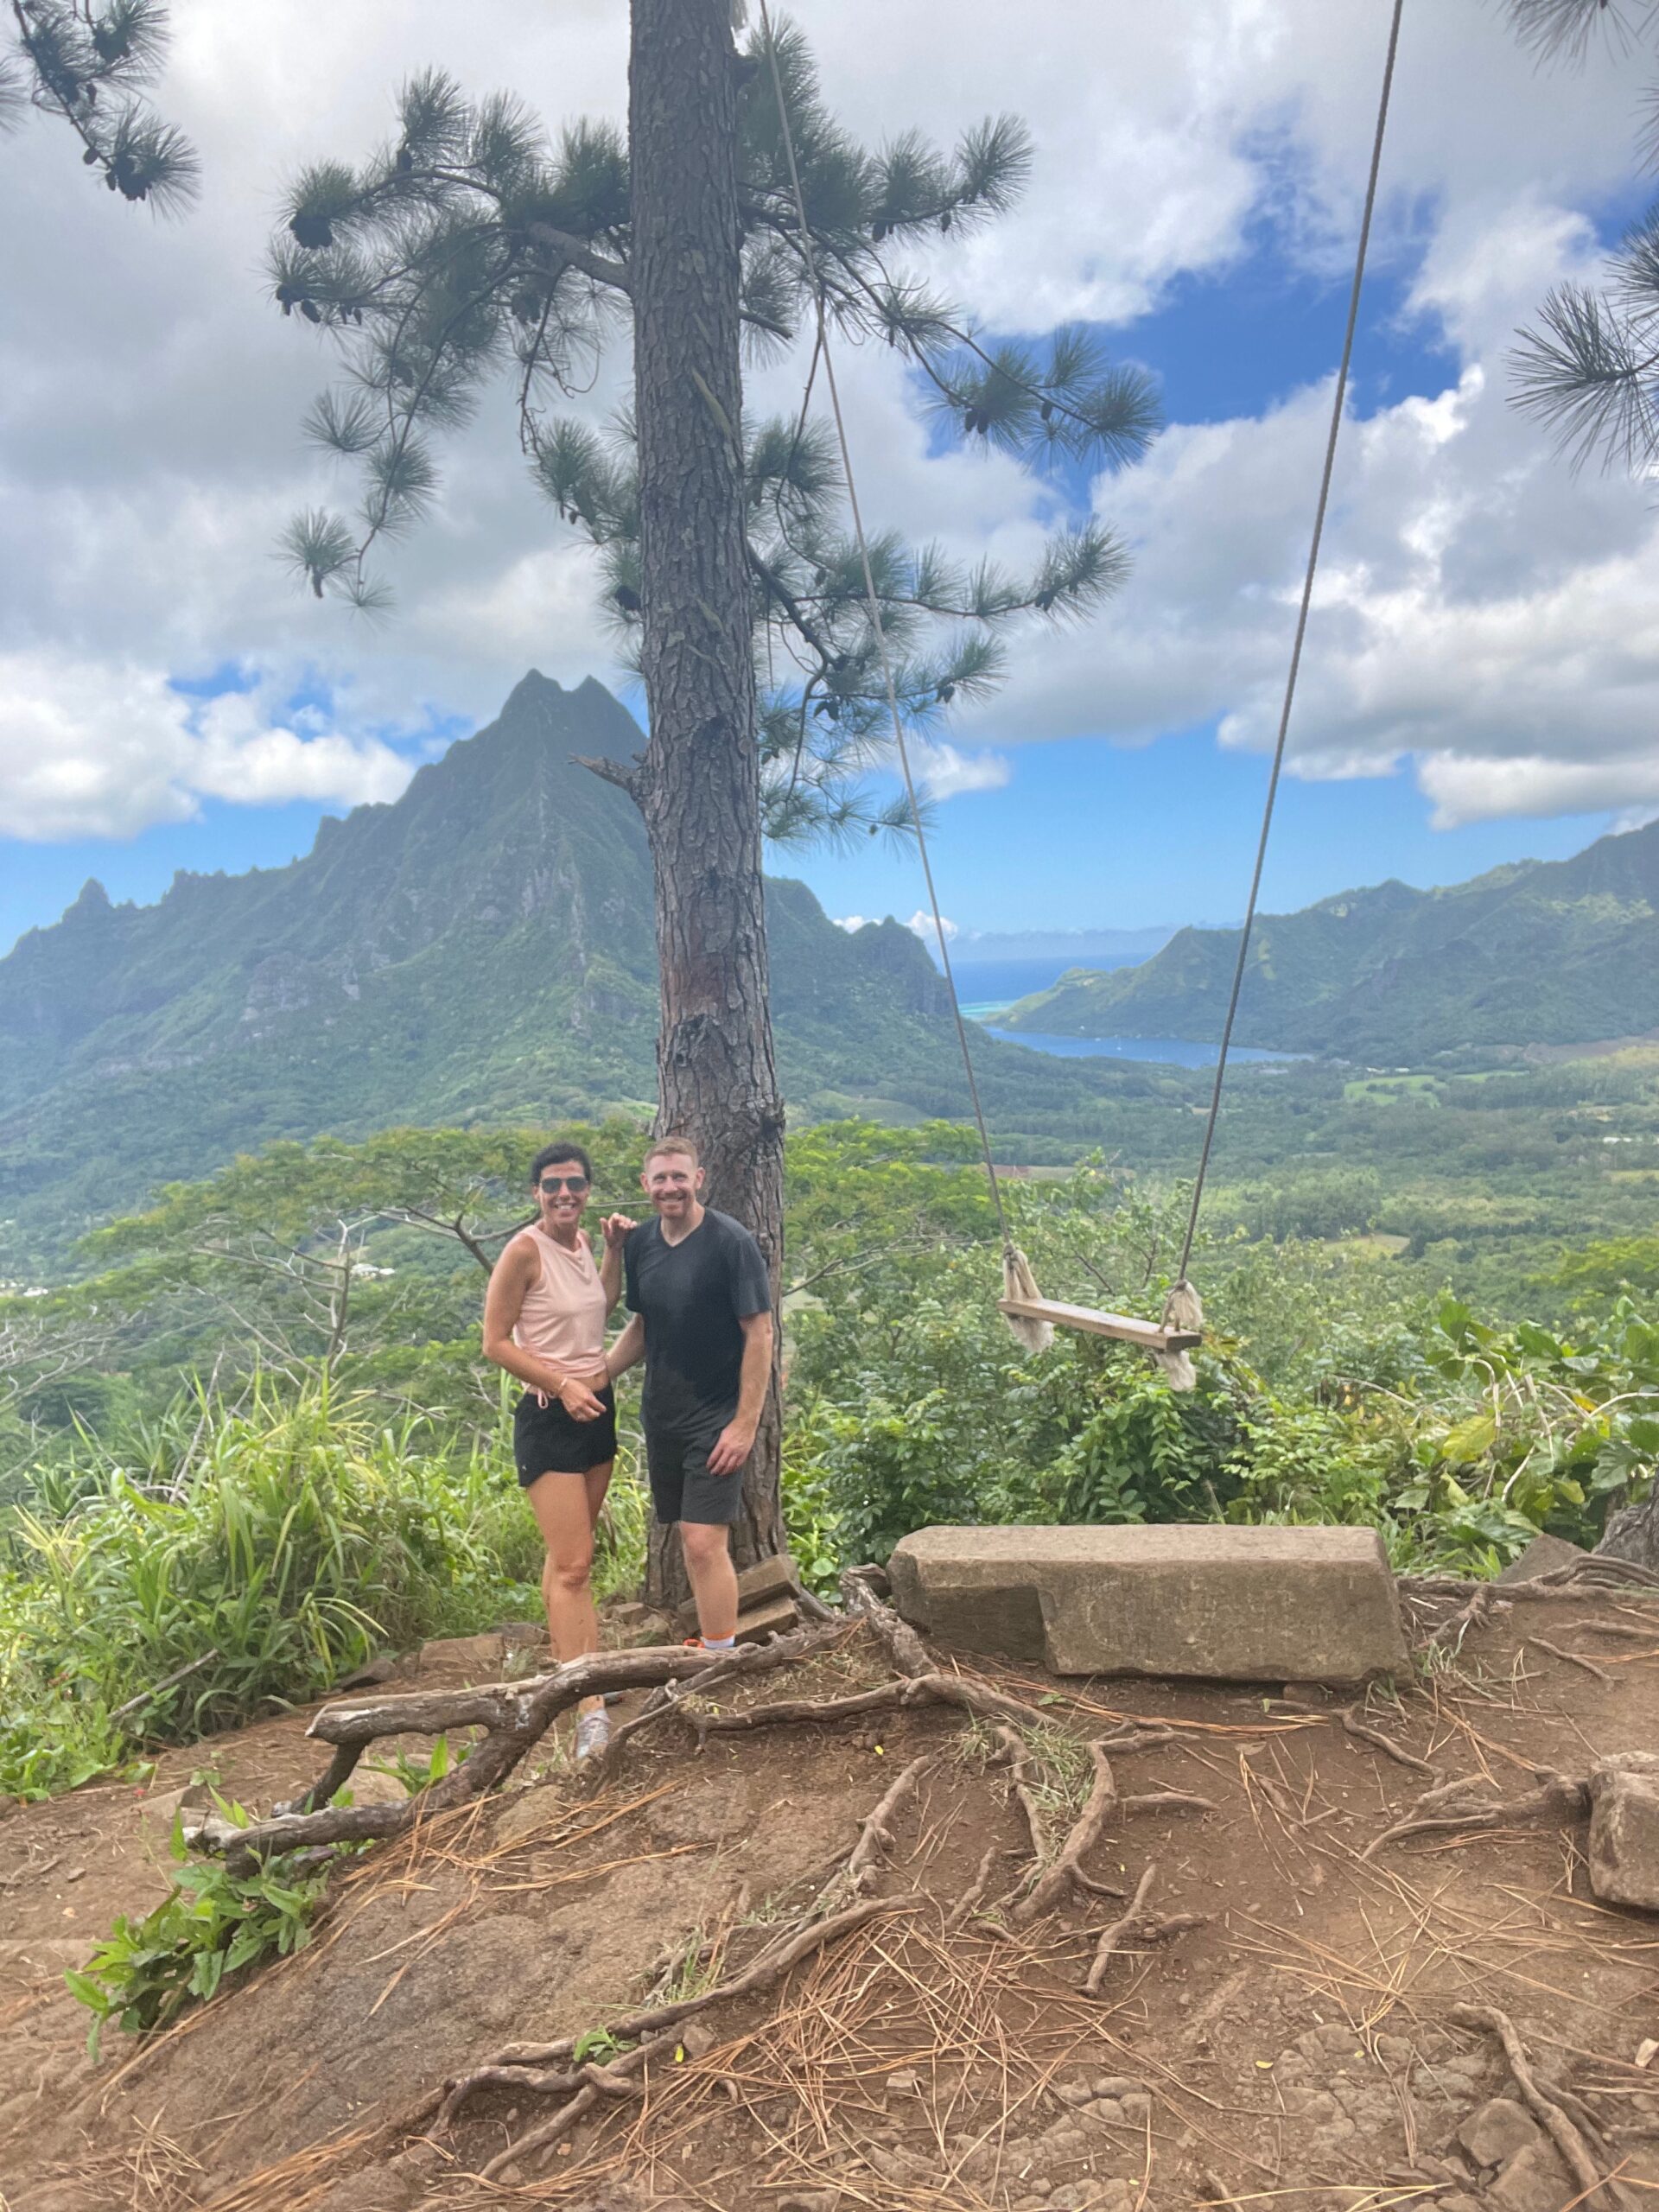 Tahiti - a honeymoon couple standing at a lookout point in Tahiti overlooking the green island with tall mountains and just a glimpse of the ocean in the background